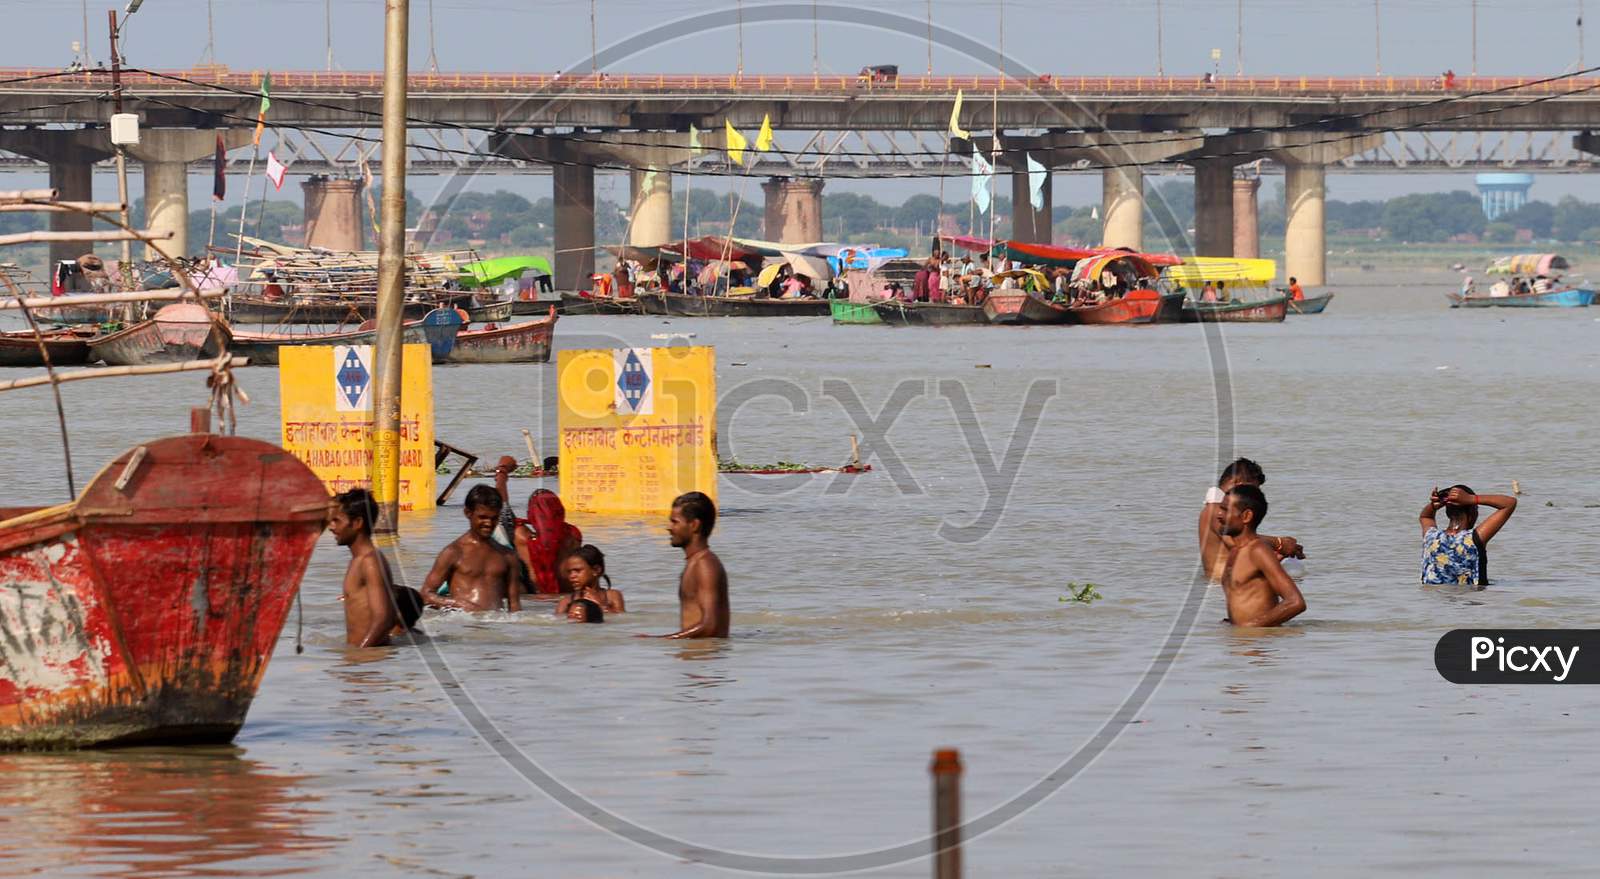 Hindu Devotees Takes Holy Dip In The Flooded Water Of Sangam, Confluence Of Three Rivers, The Ganga, The Yamuna And Mythical Saraswati In Prayagraj,